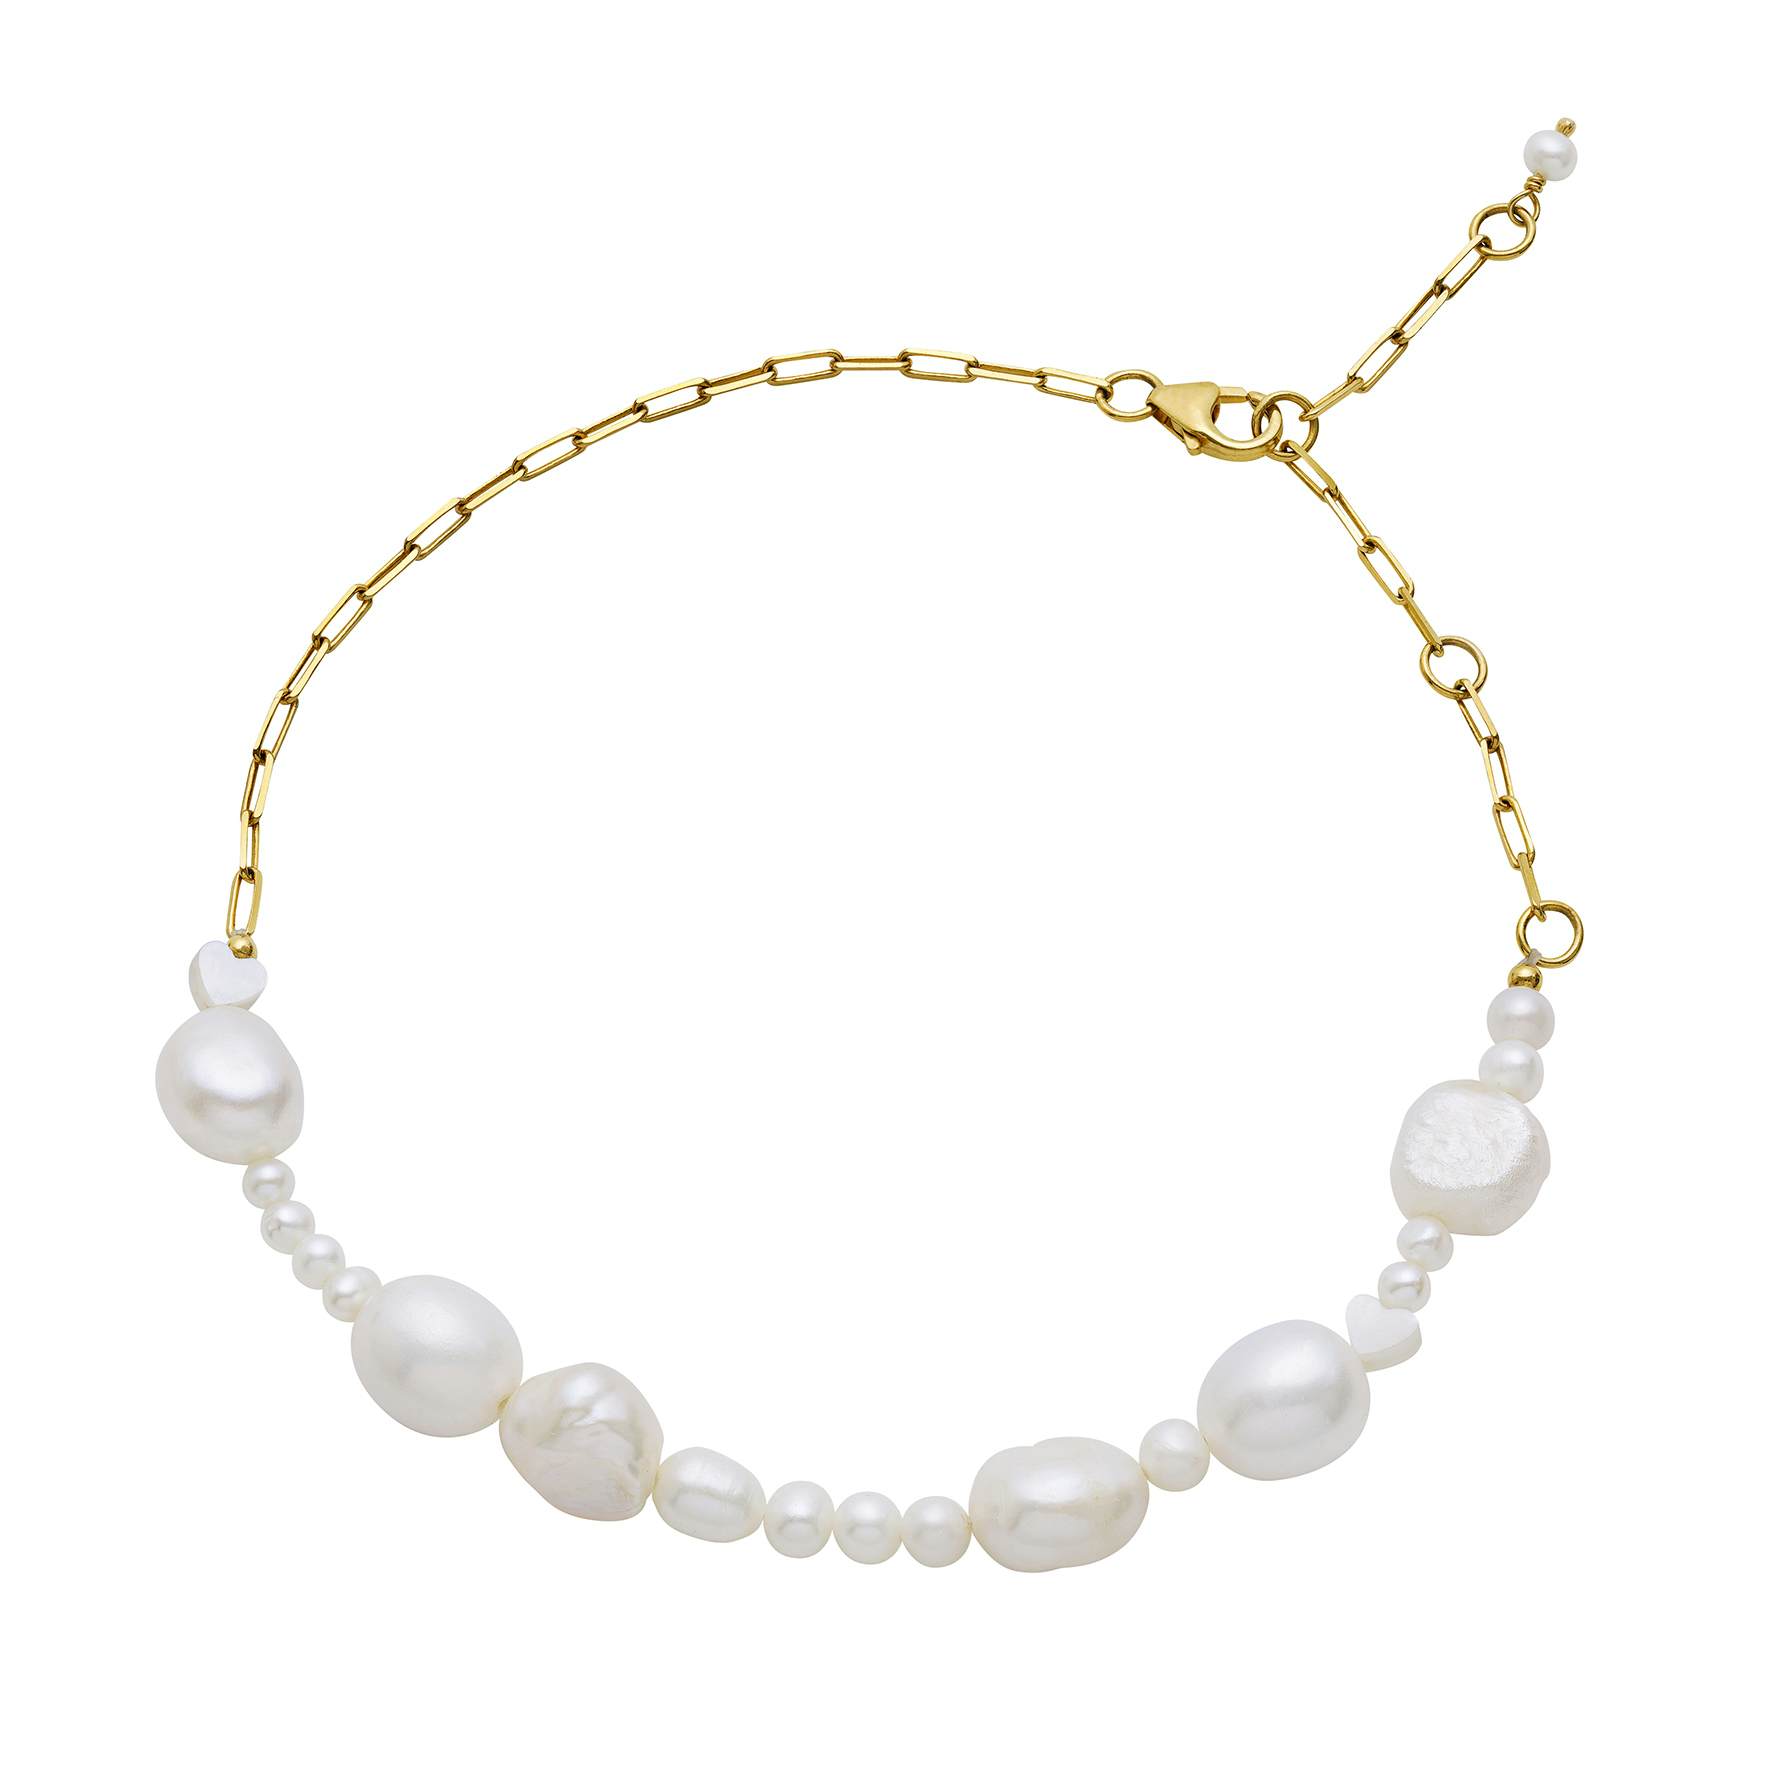 Inez Anklet from Maanesten in Goldplated-Silver Sterling 925|Freshwater Pearl|Blank